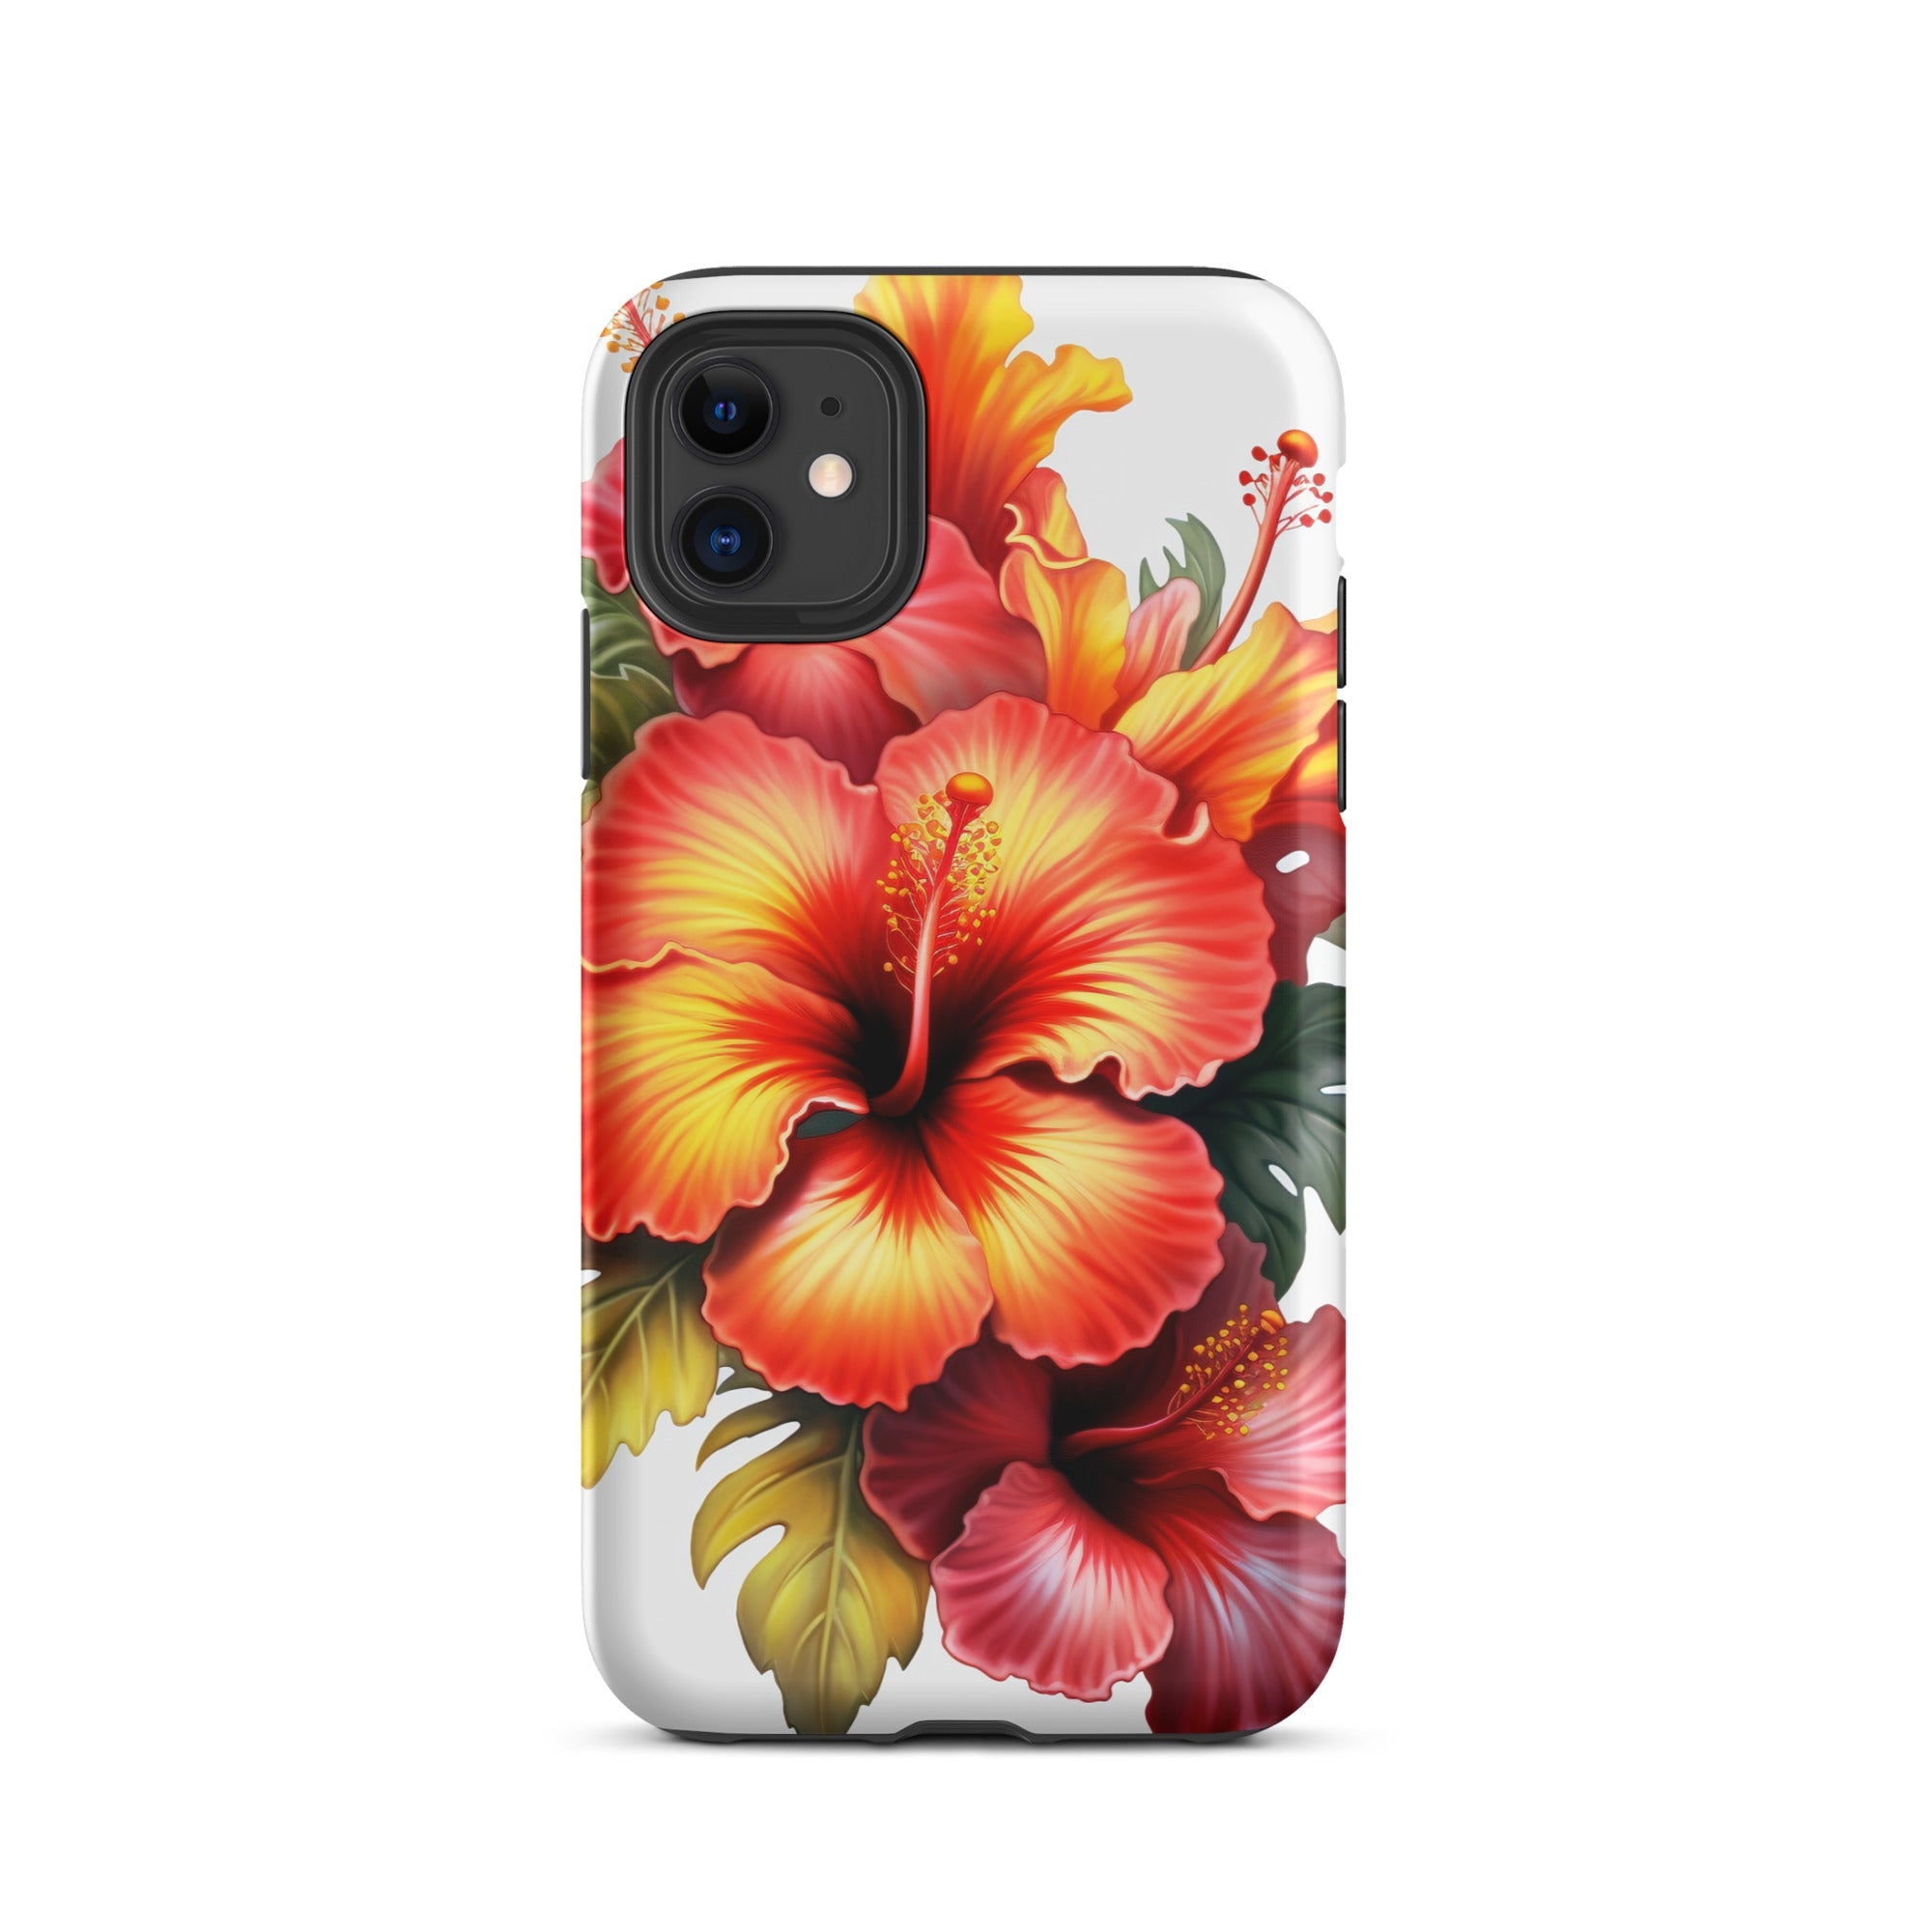 Hibiscus Flower iPhone Case by Visual Verse - Image 2